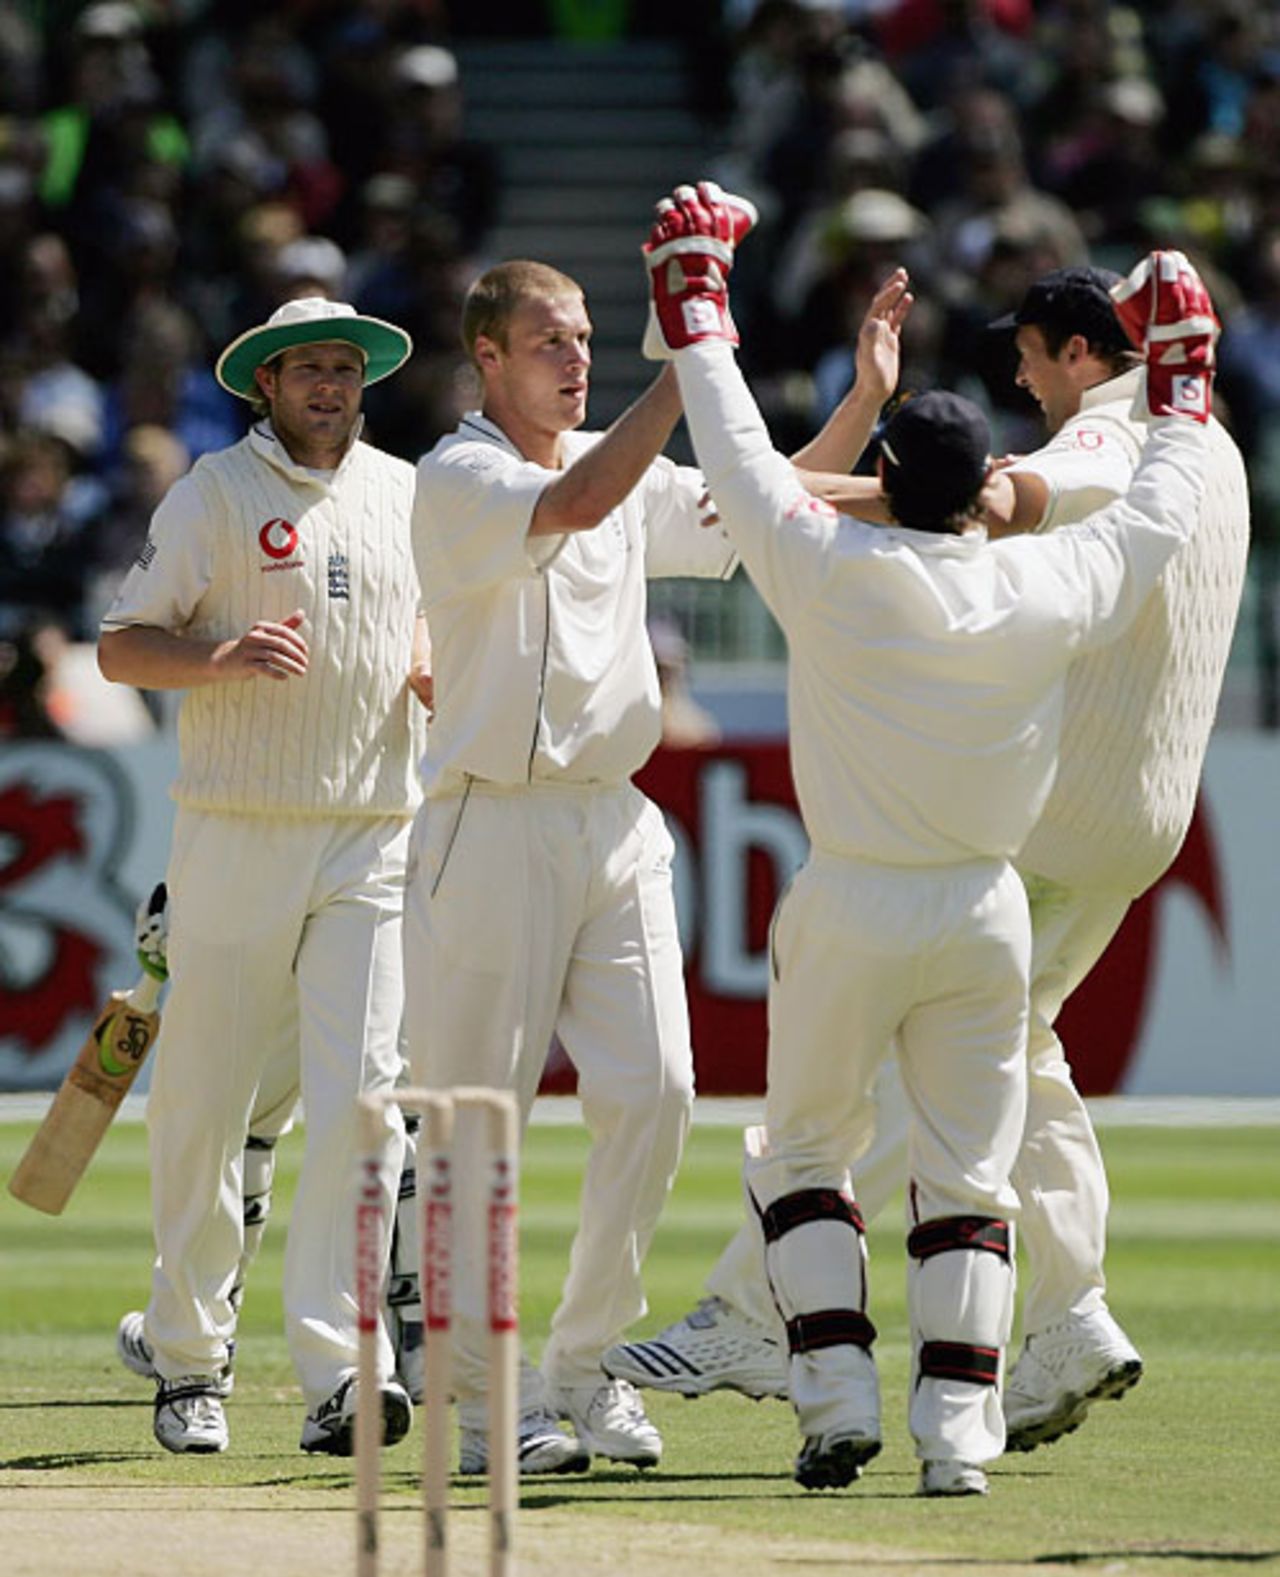 A determined Andrew Flintoff is congratulated on dismissing Ricky Ponting, Australia v England, 4th Test, Melbourne, December 27, 2006